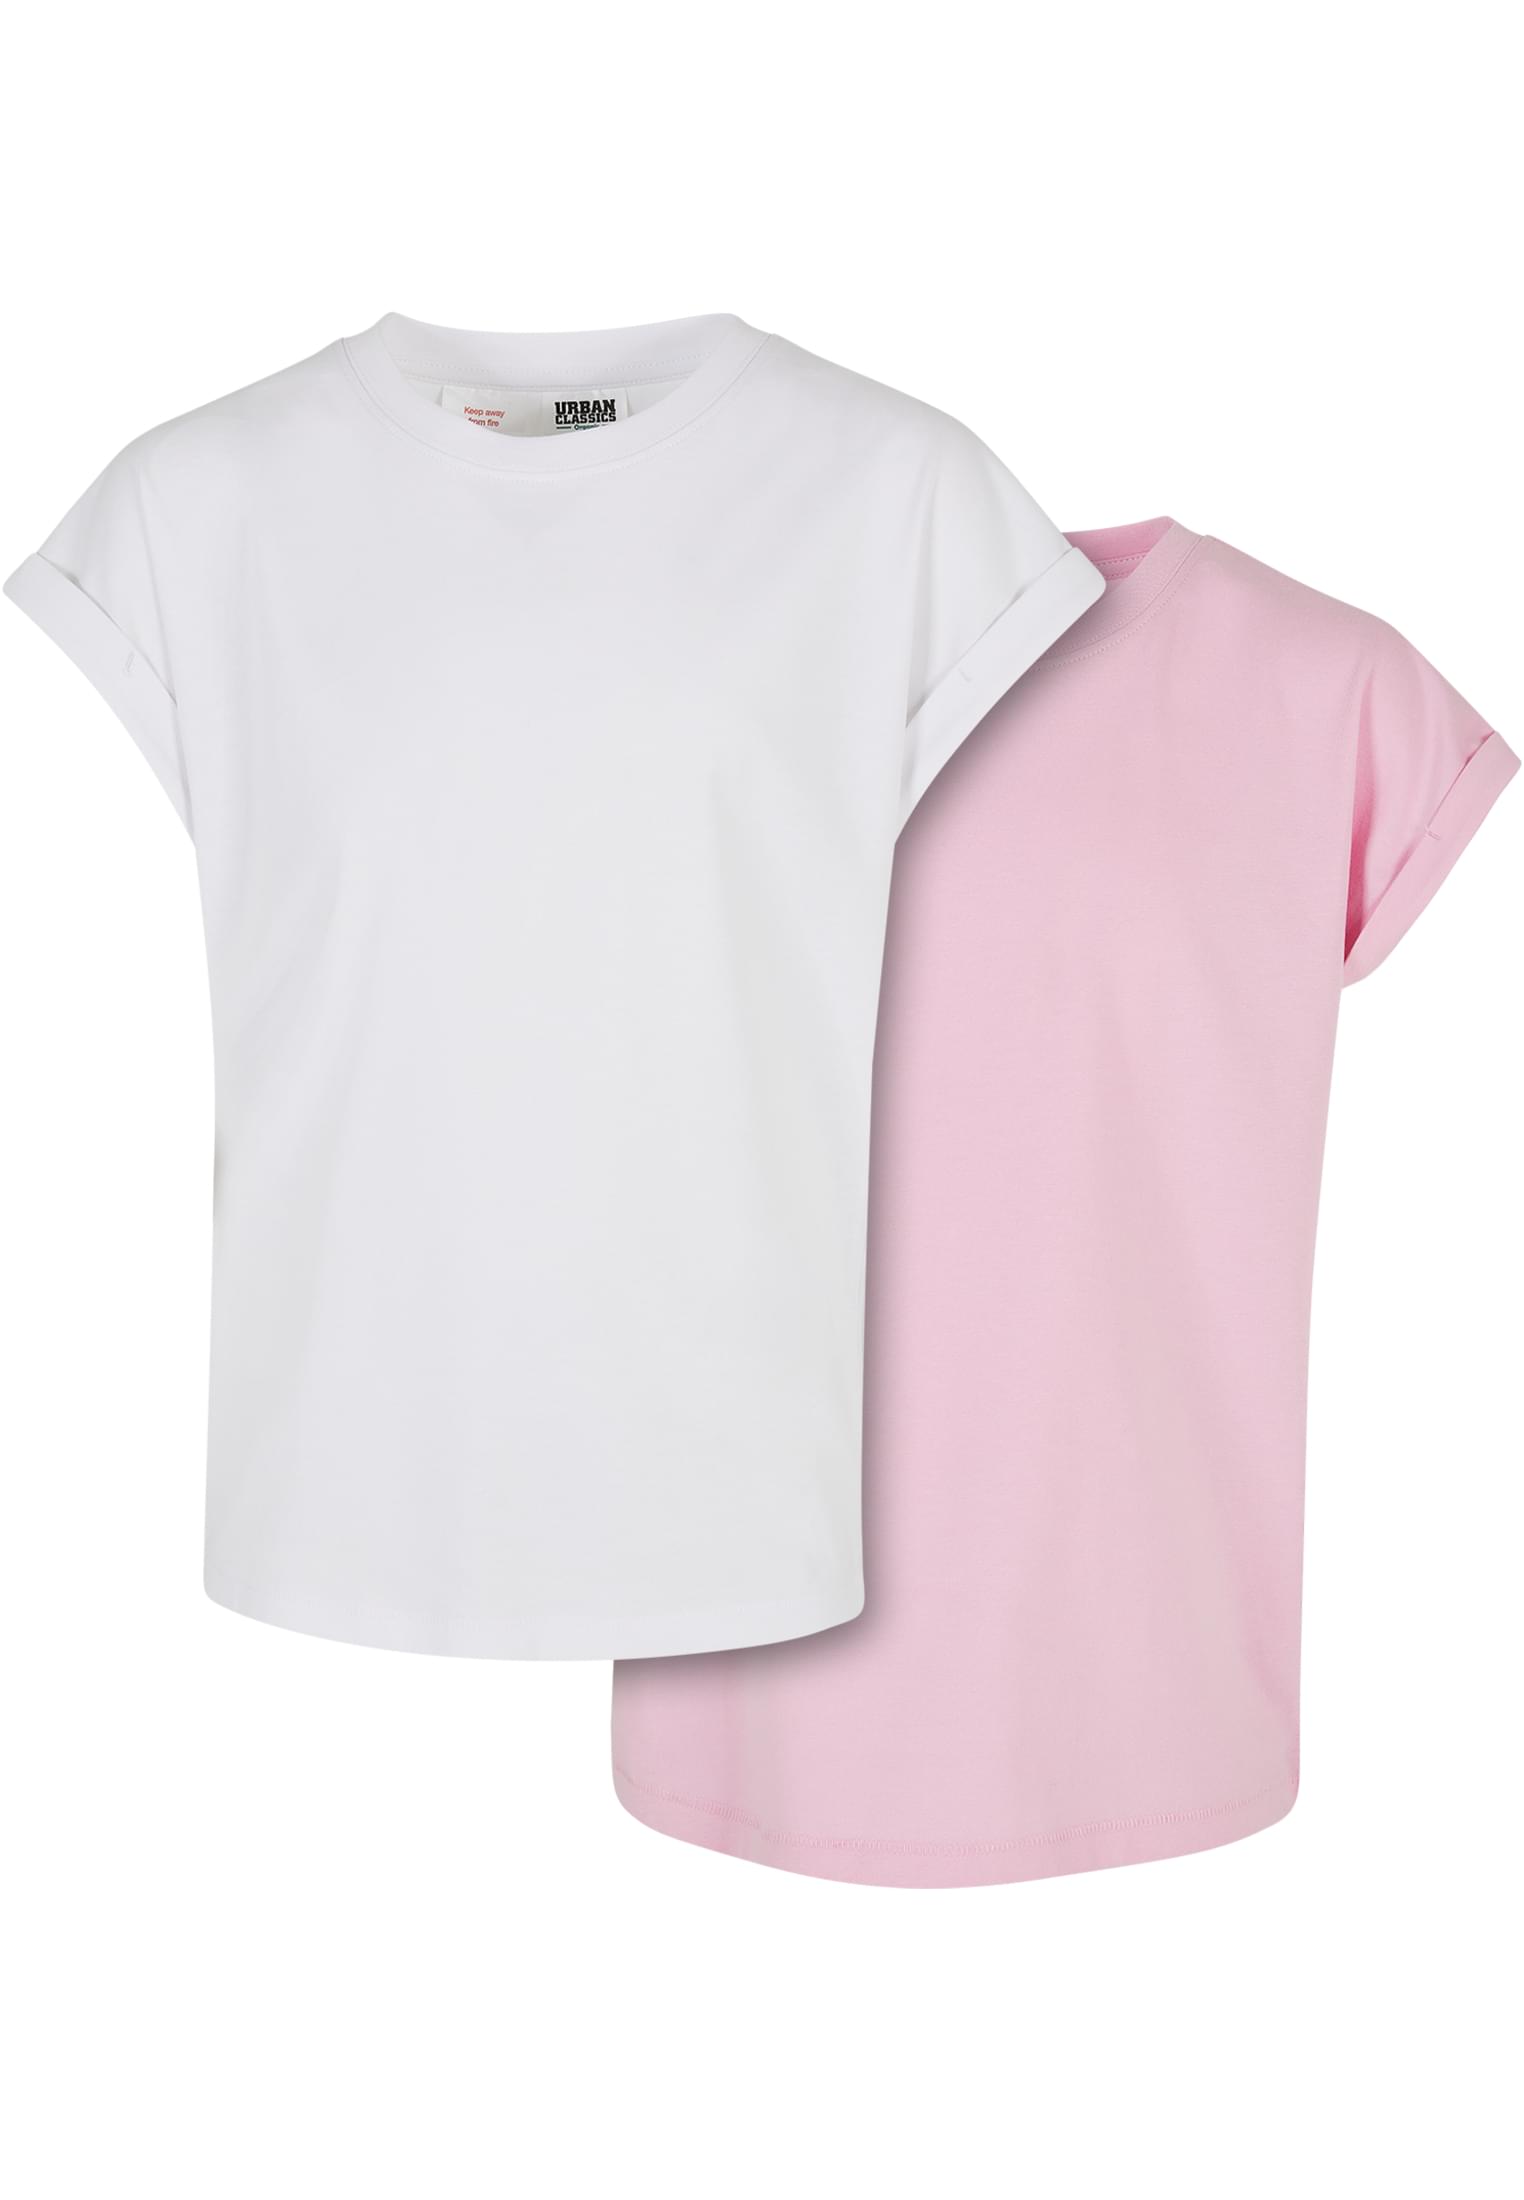 Girls' Organic T-Shirt With Extended Shoulder 2-Pack White/Girls' Pink